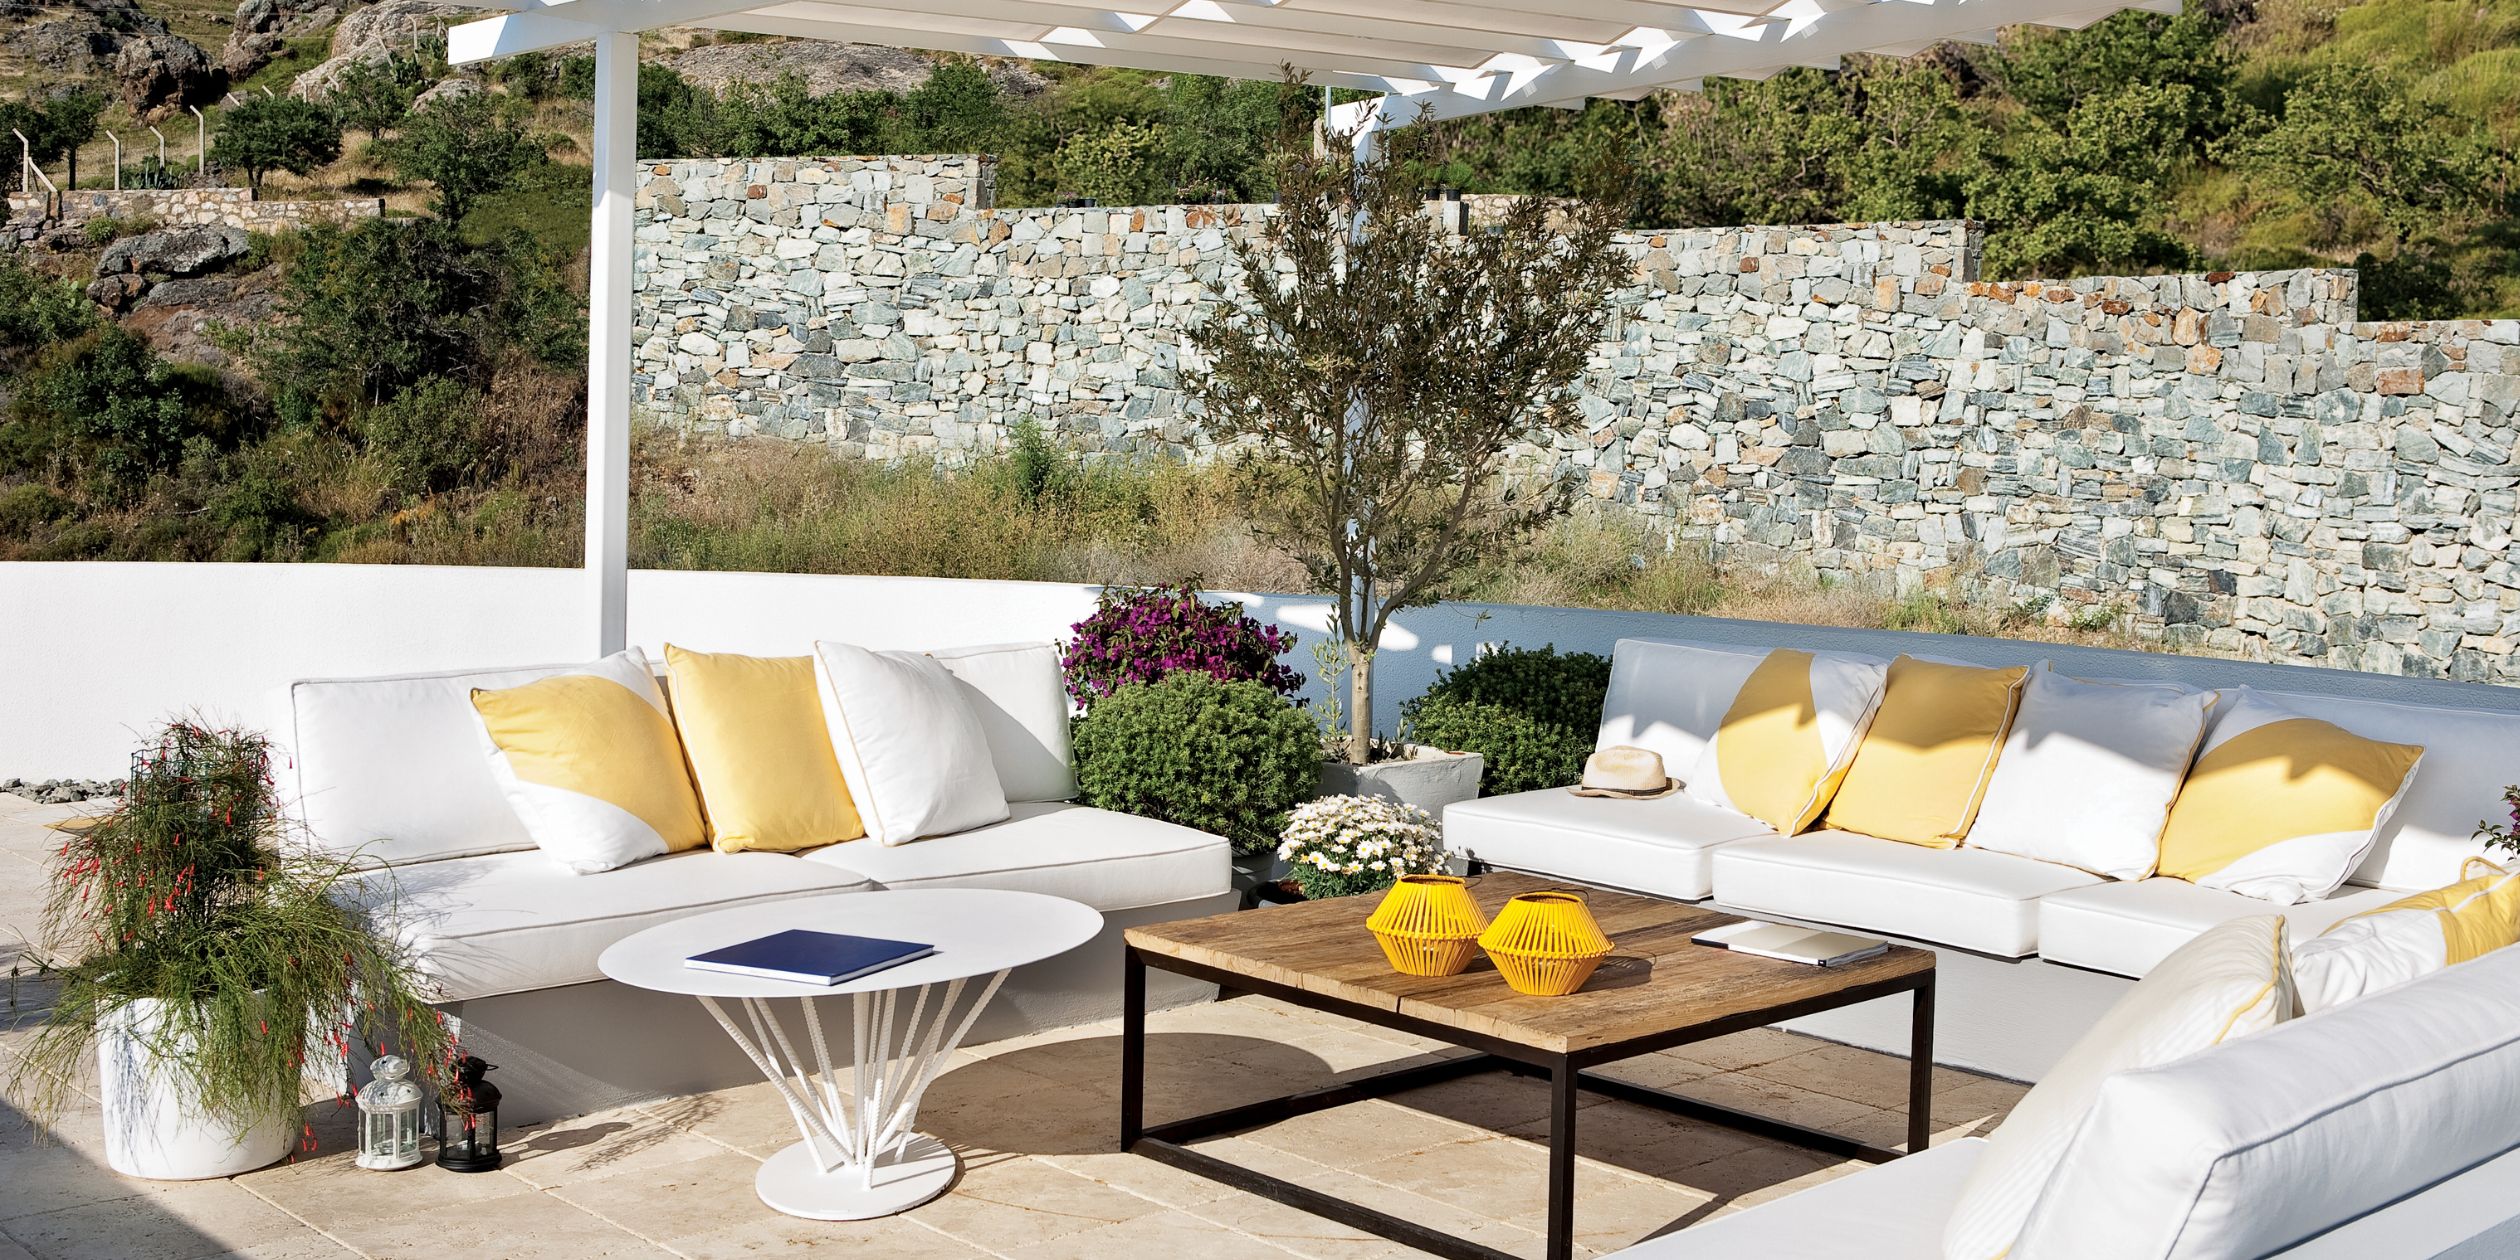 Outdoor Furniture Ideas: How to Help Your Customers Find the Perfect Set